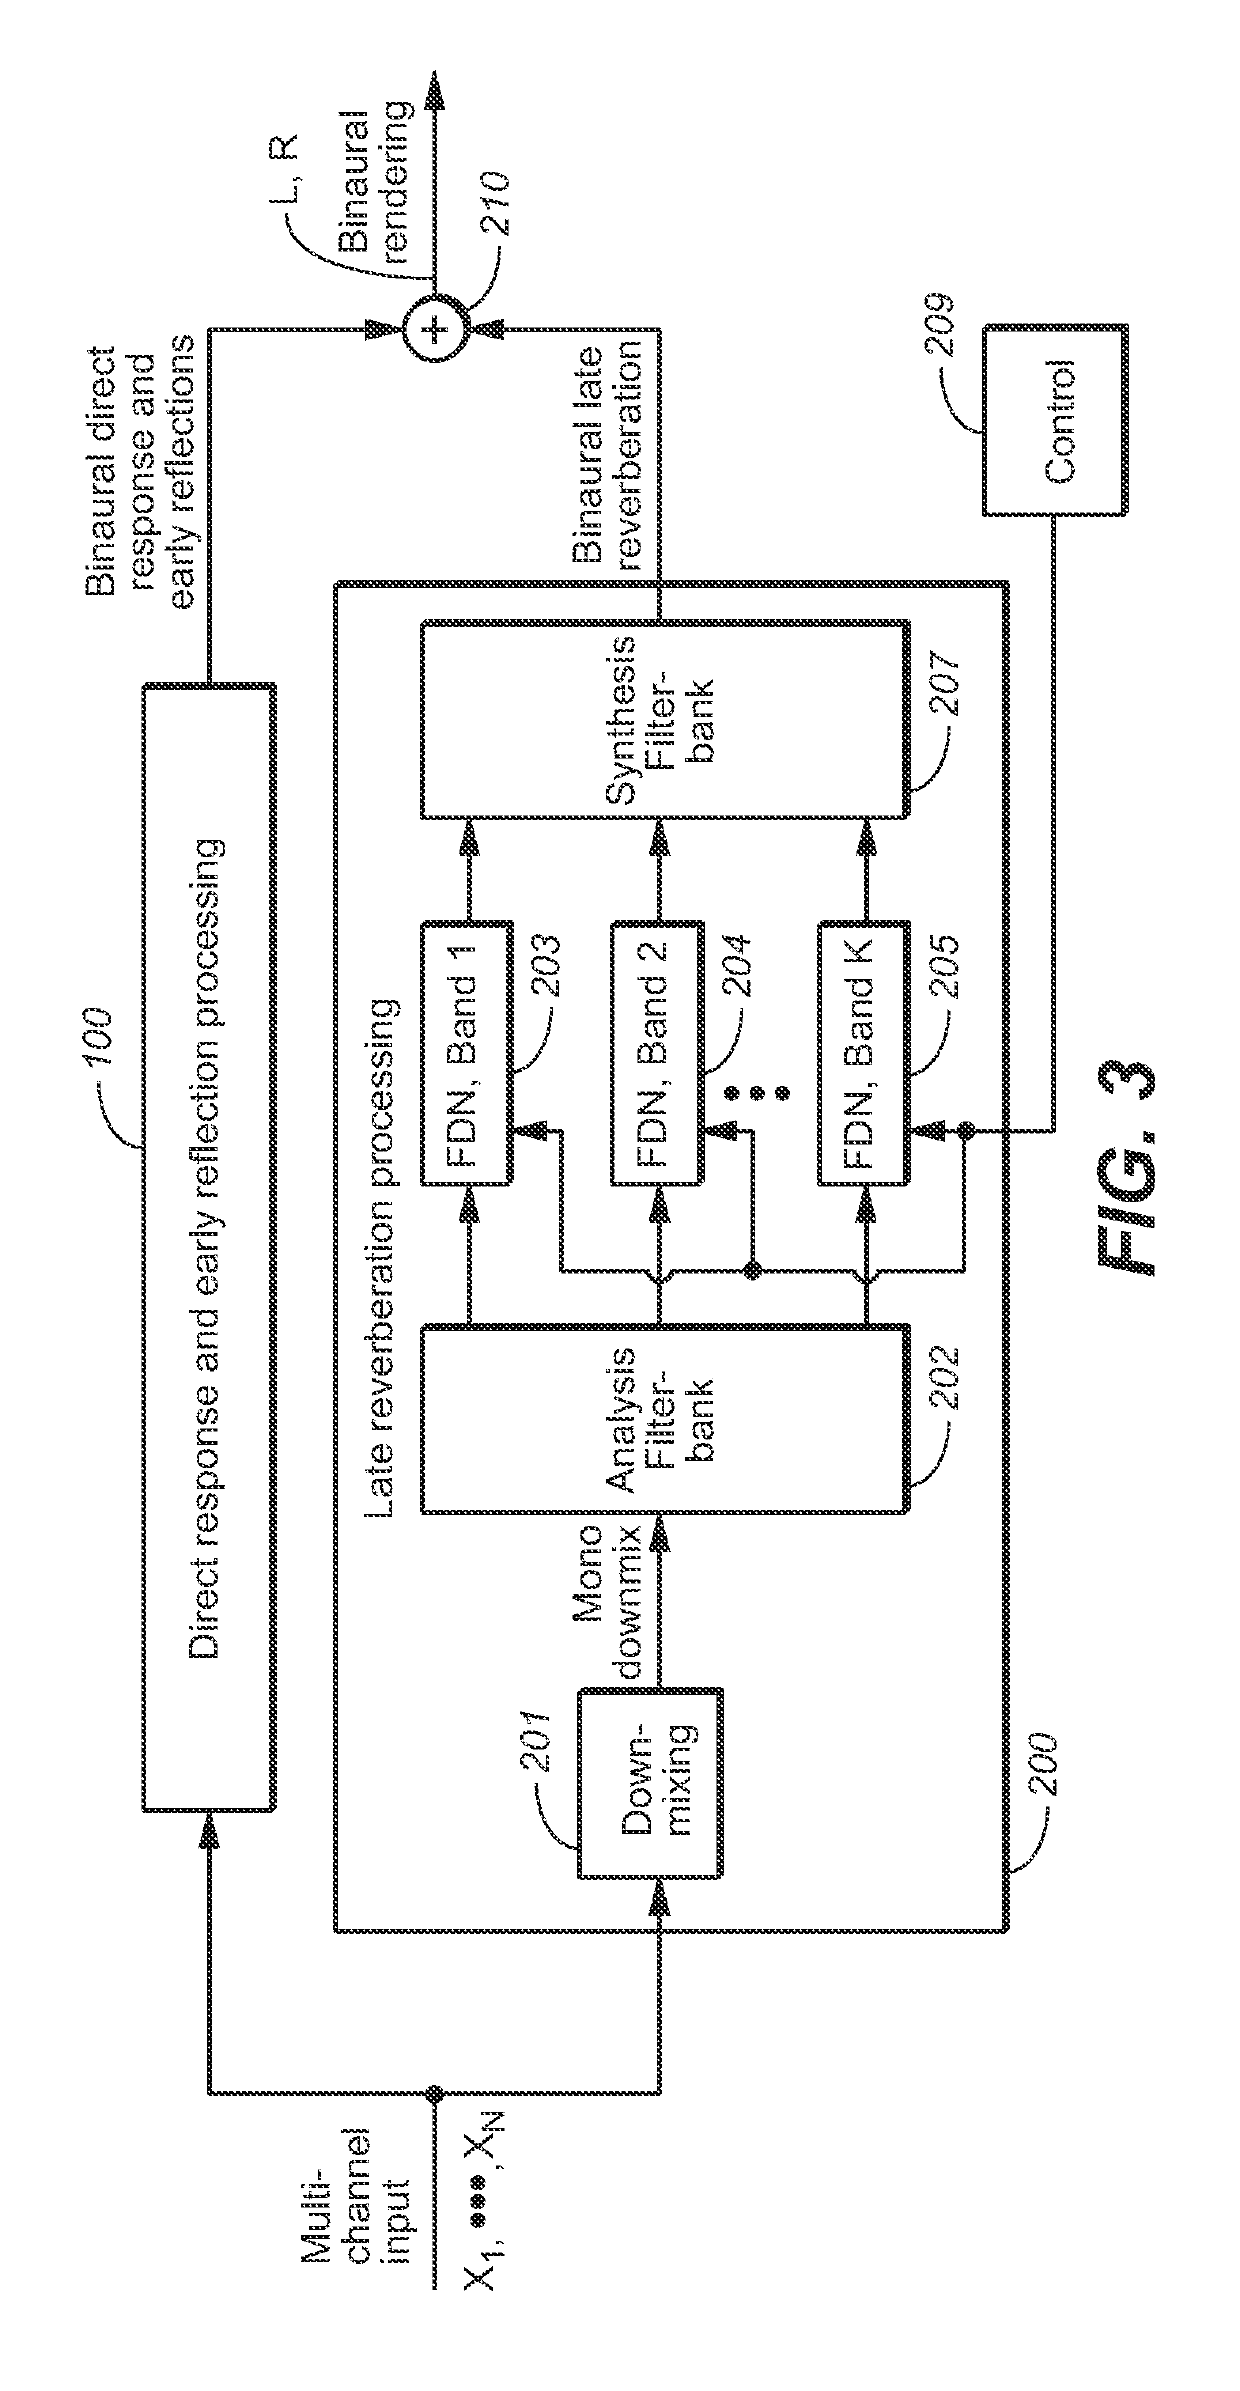 Generating binaural audio in response to multi-channel audio using at least one feedback delay network